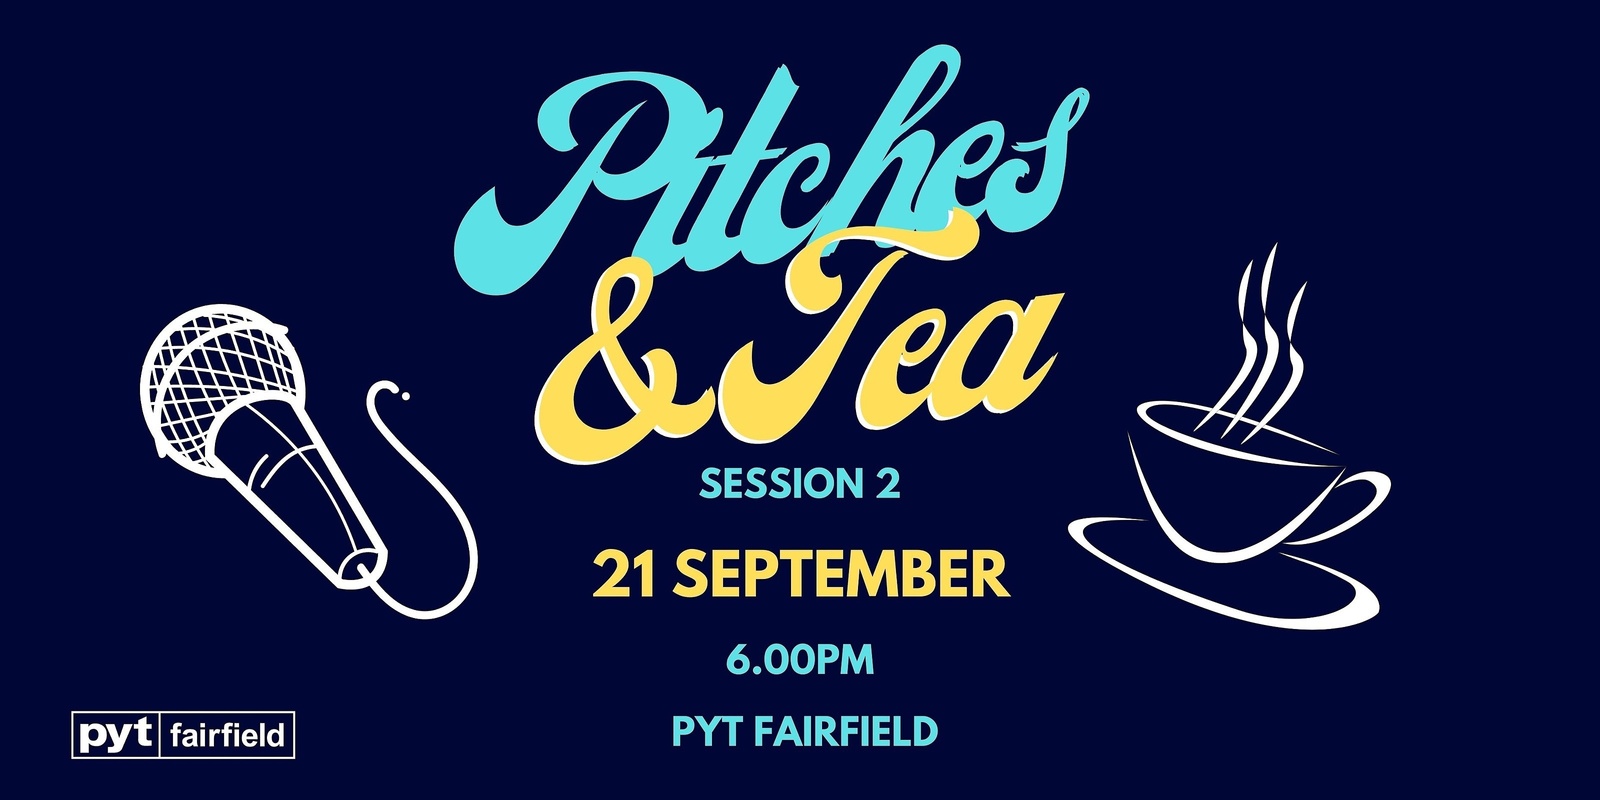 Banner image for Pitches & Tea: Session 2